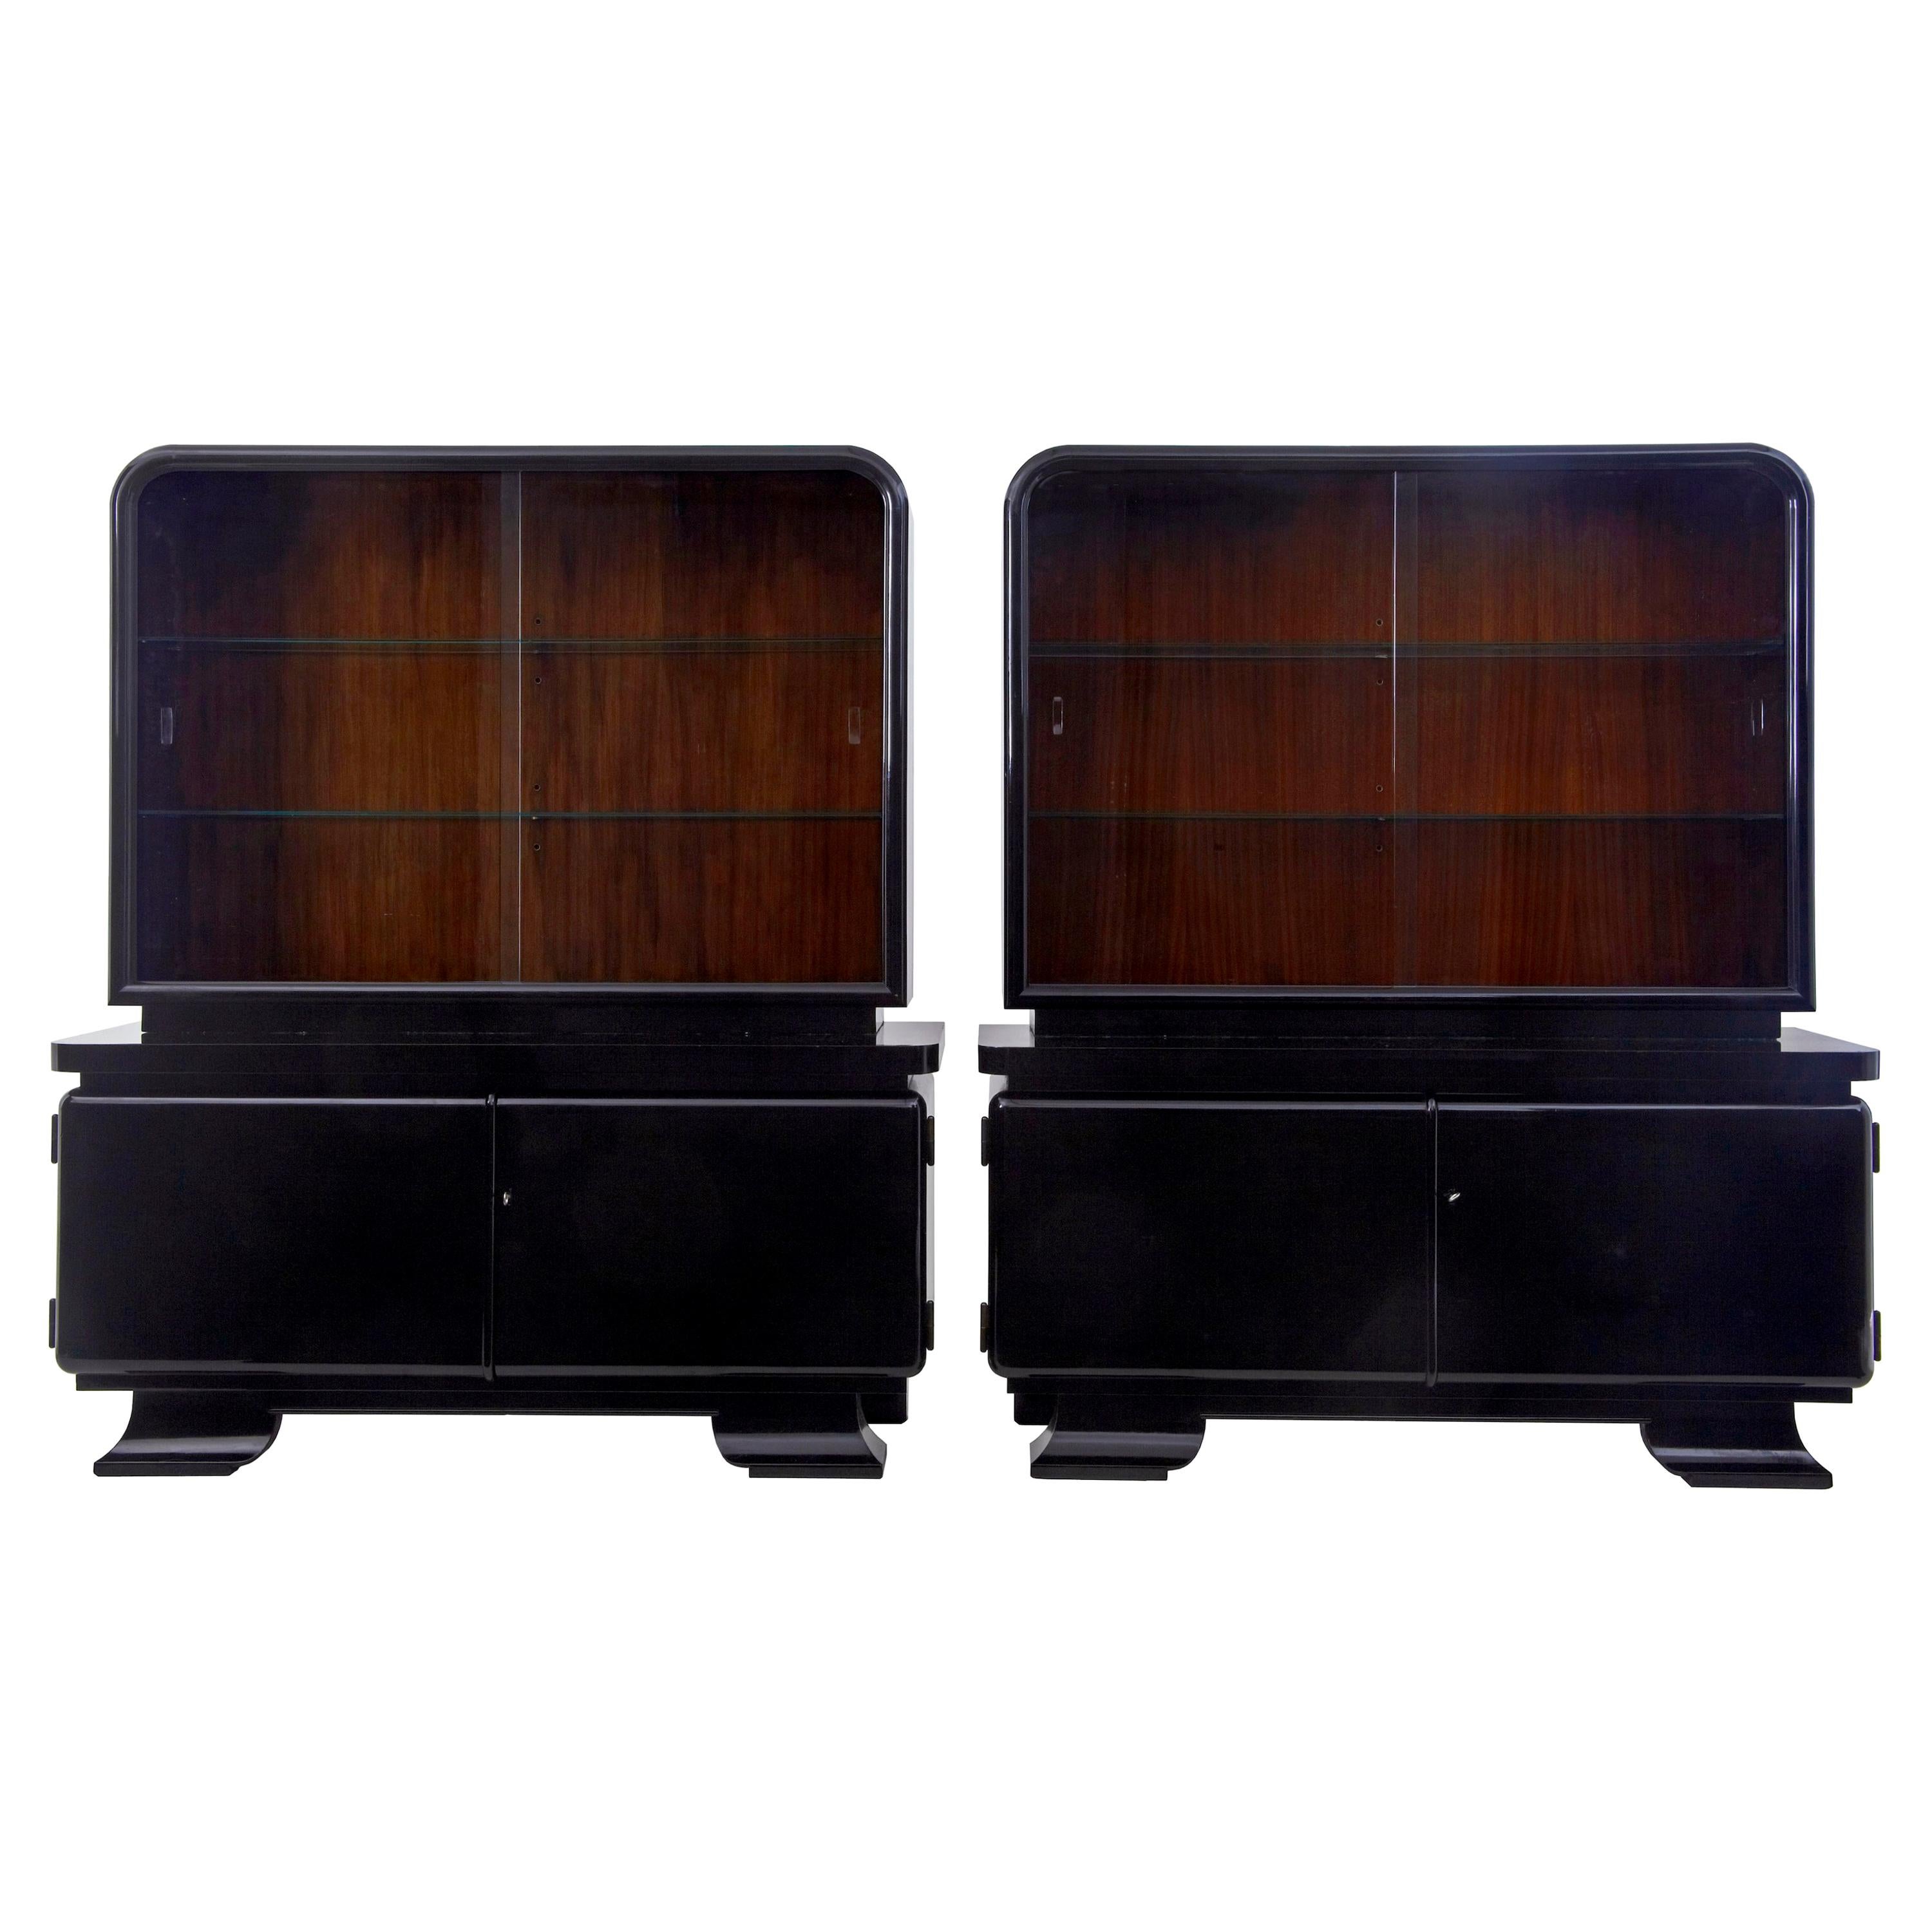 Stunning Pair of Art Deco Black Lacquered Sideboard Vitrines